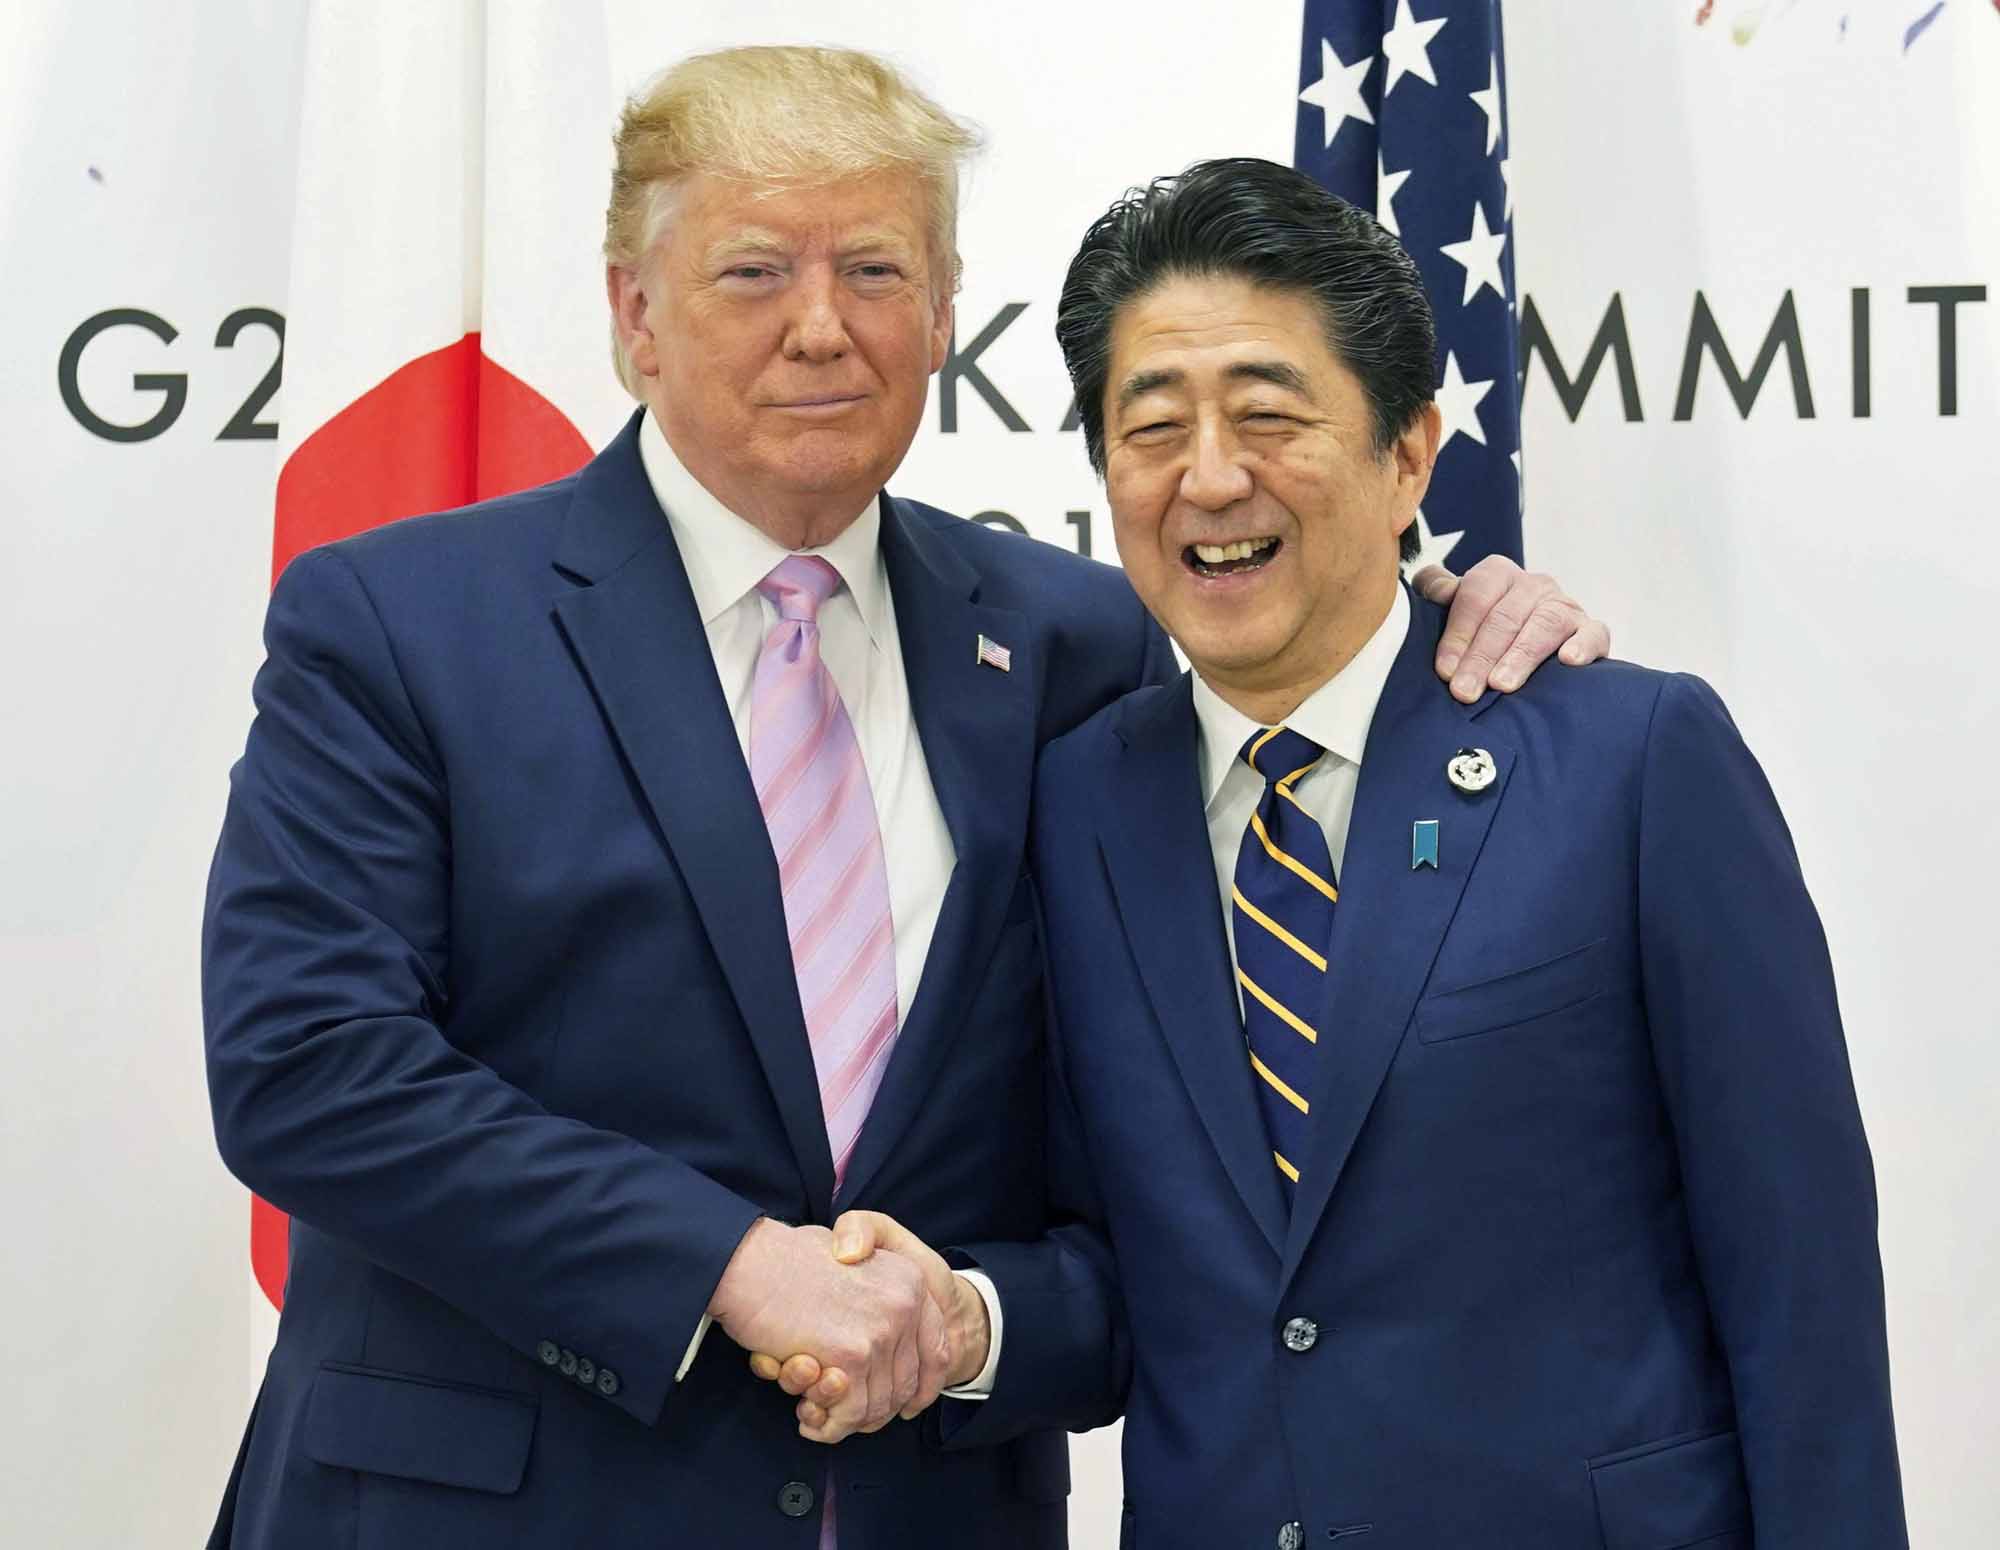 U.S. President Donald Trump shakes hands with Prime Minister Shinzo Abe during the Group of 20 leaders summit in Osaka on Friday. | REUTERS / VIA KYODO